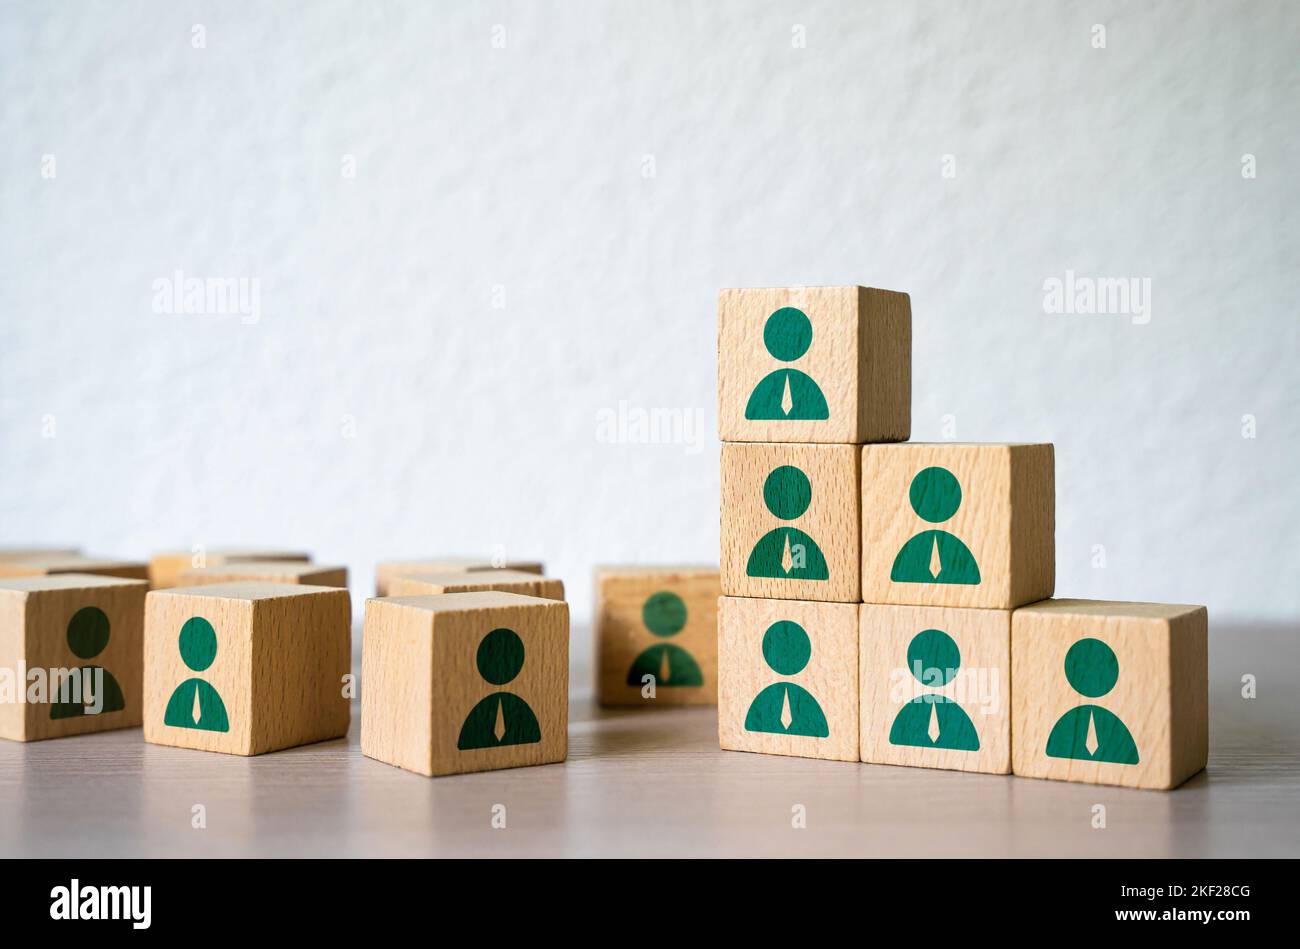 Hire people and build your business company. Competently building the structure of departments and the hierarchy of the team for better performance. H Stock Photo